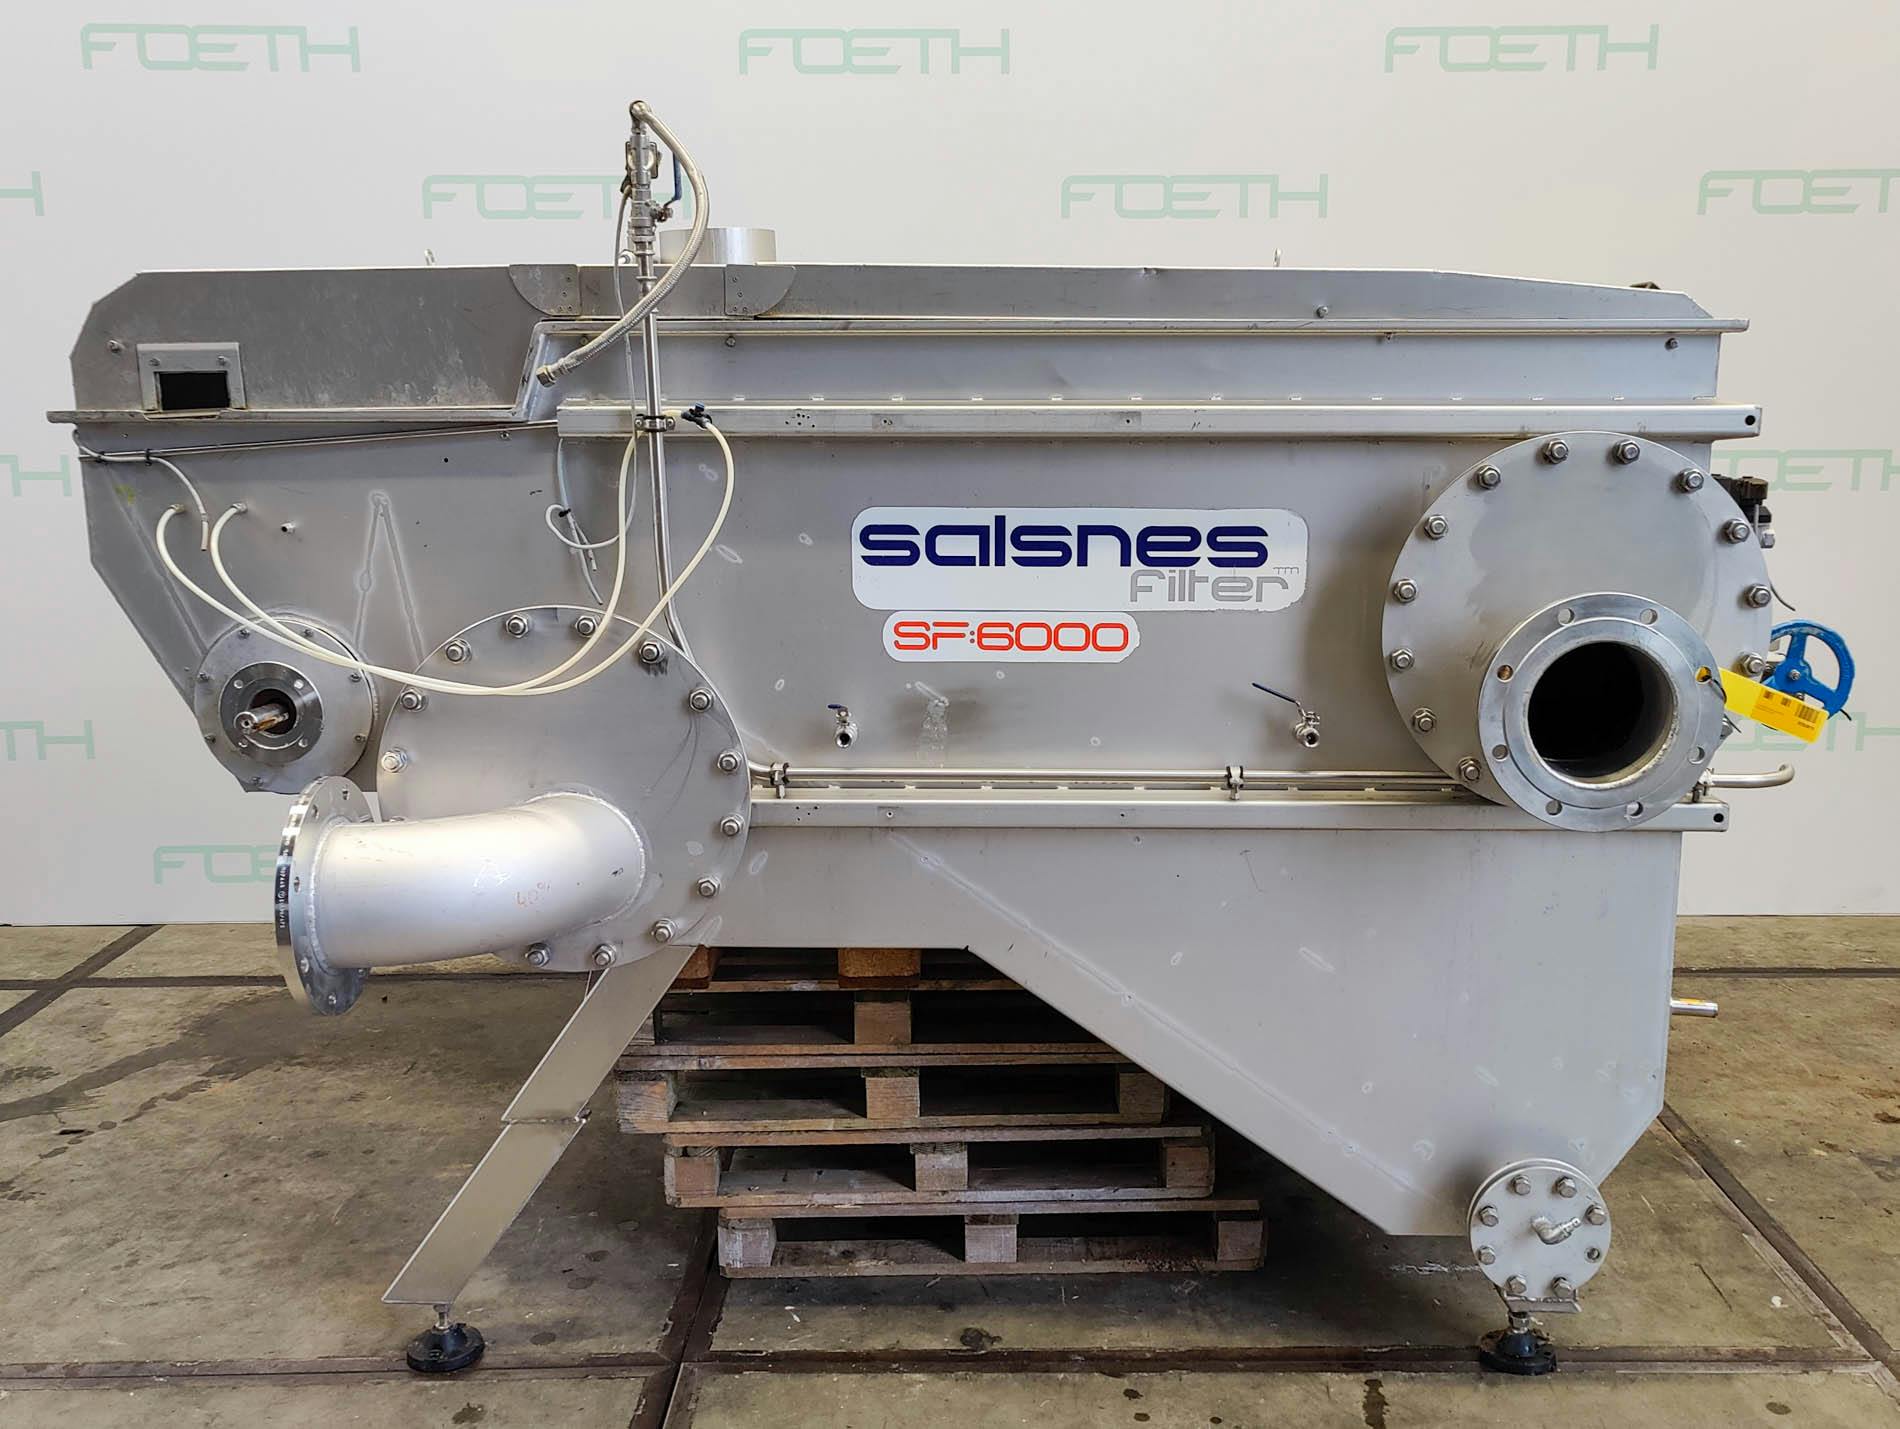 Salsnes 6000 "Solids Separation with Integrated Sludge Thickening and Dewatering" - Filter